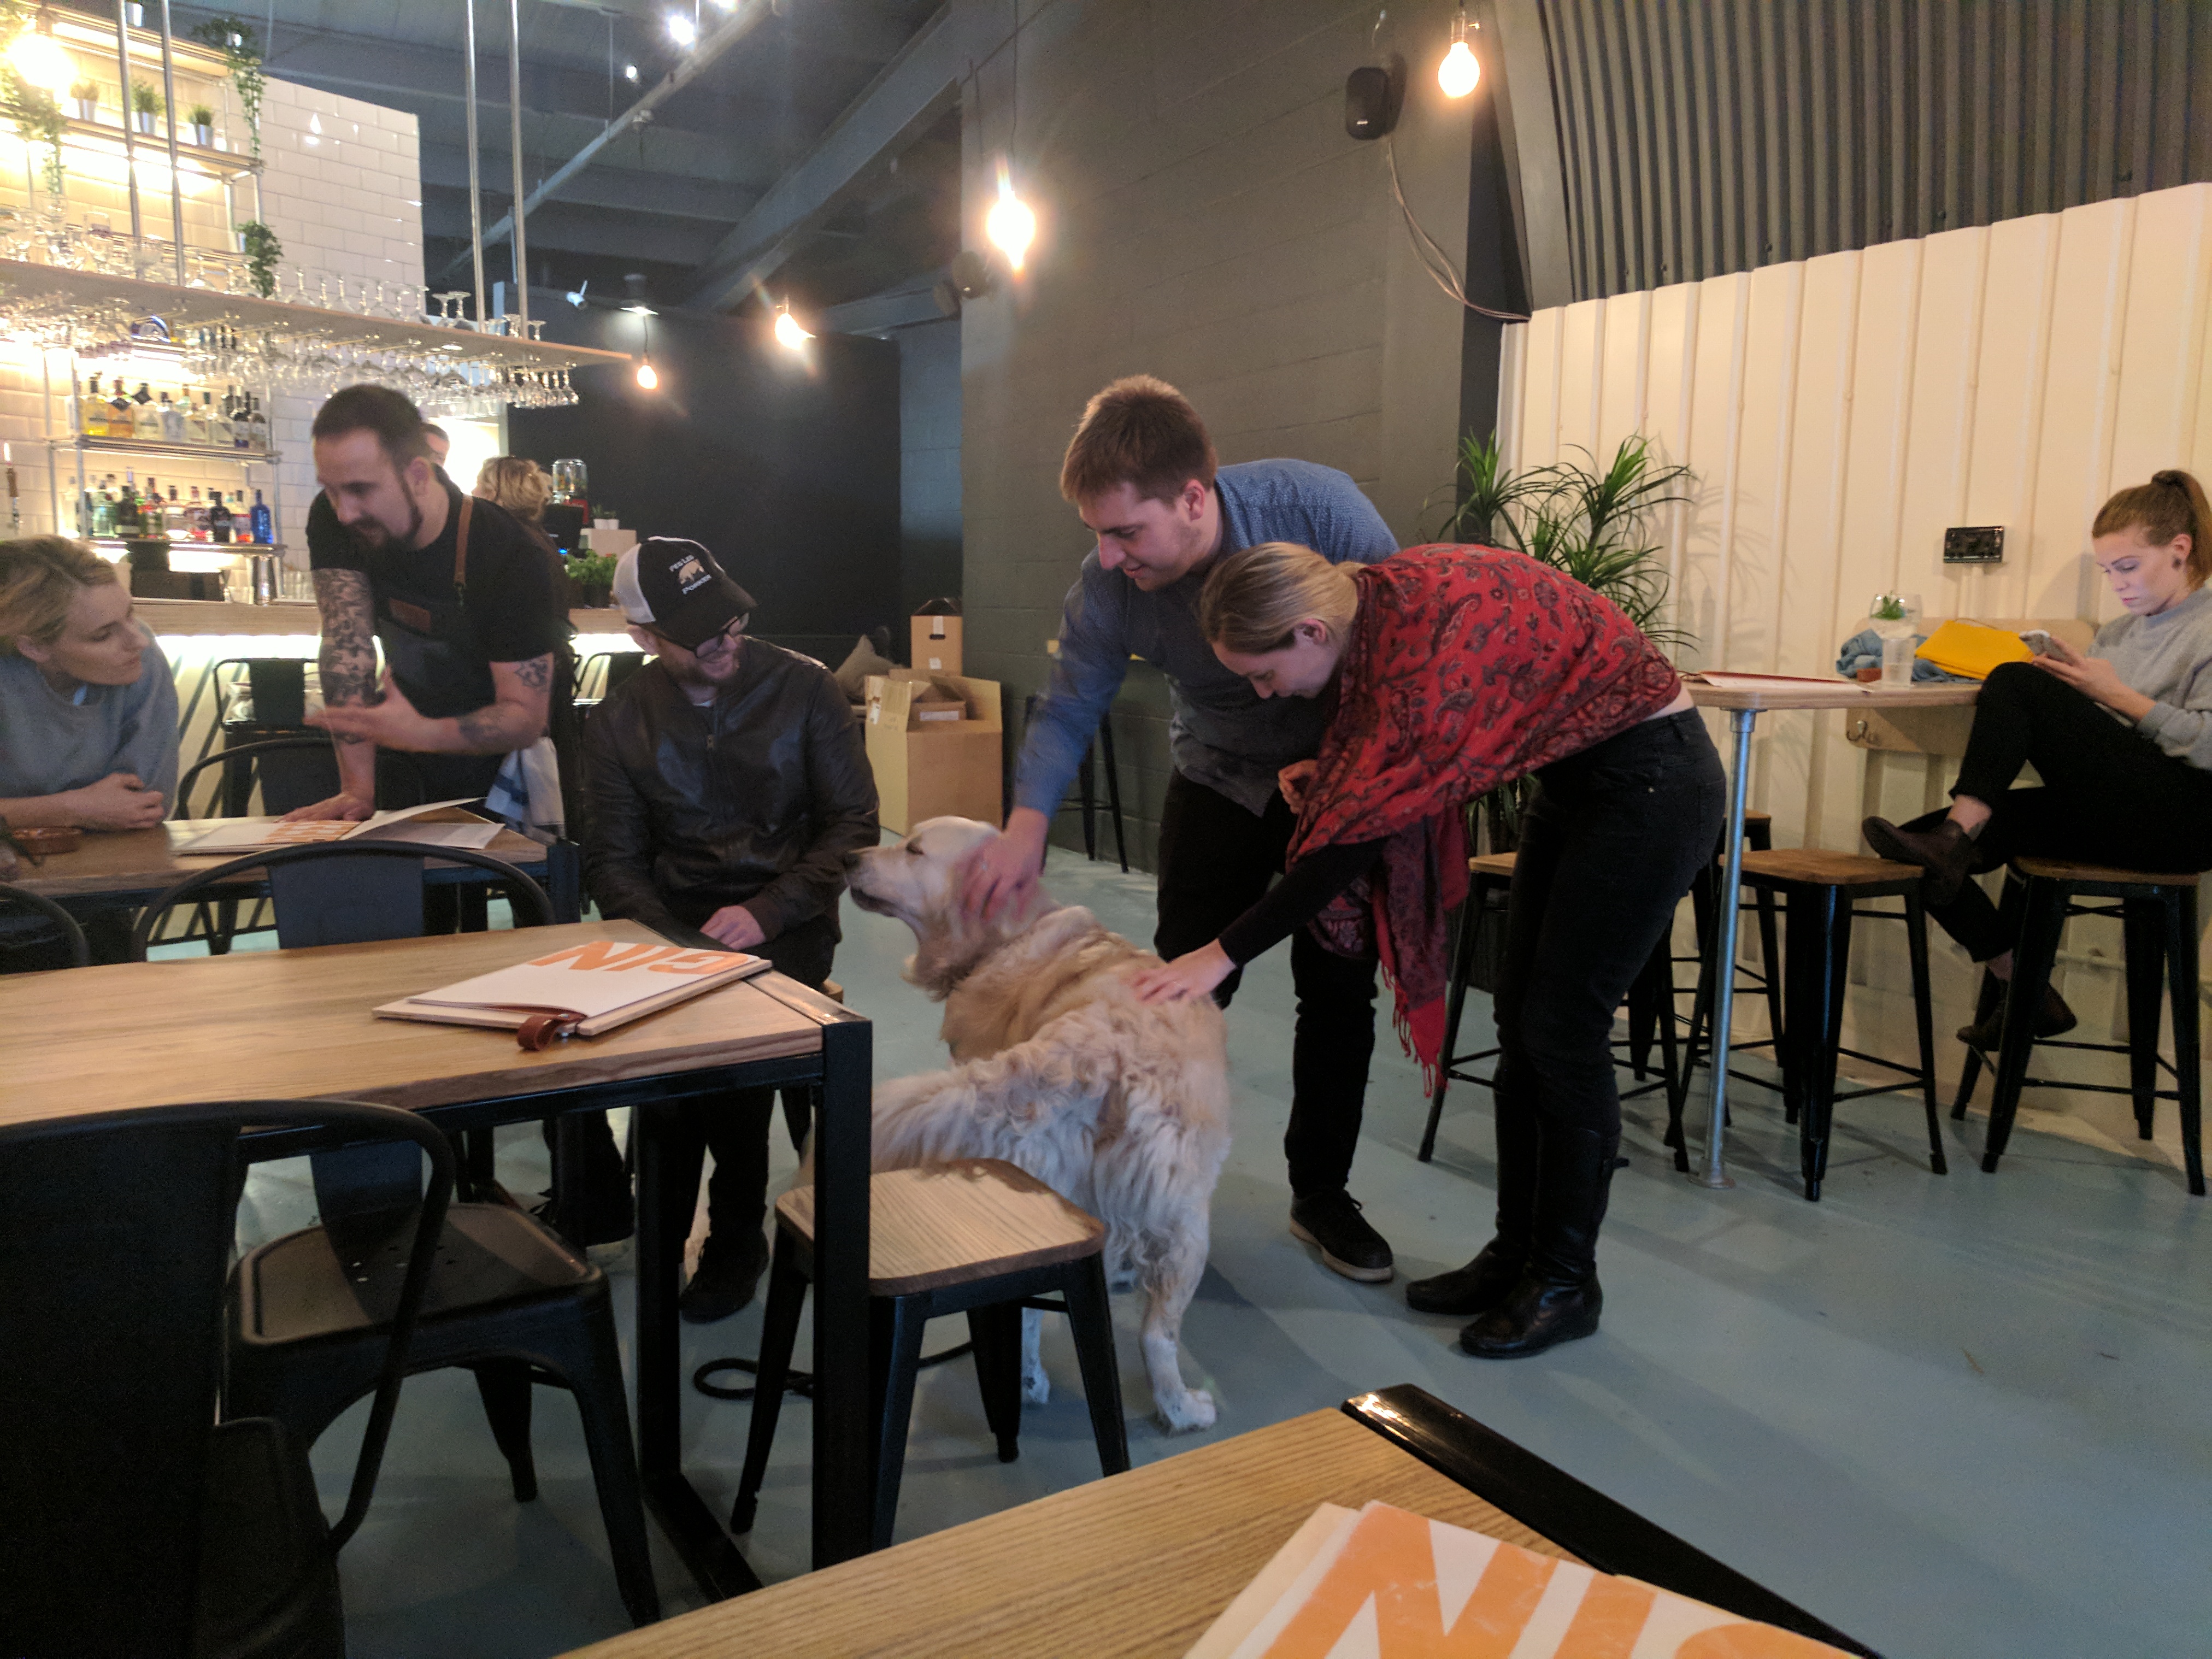 Tom and Shashi petting a dog in a cafe.